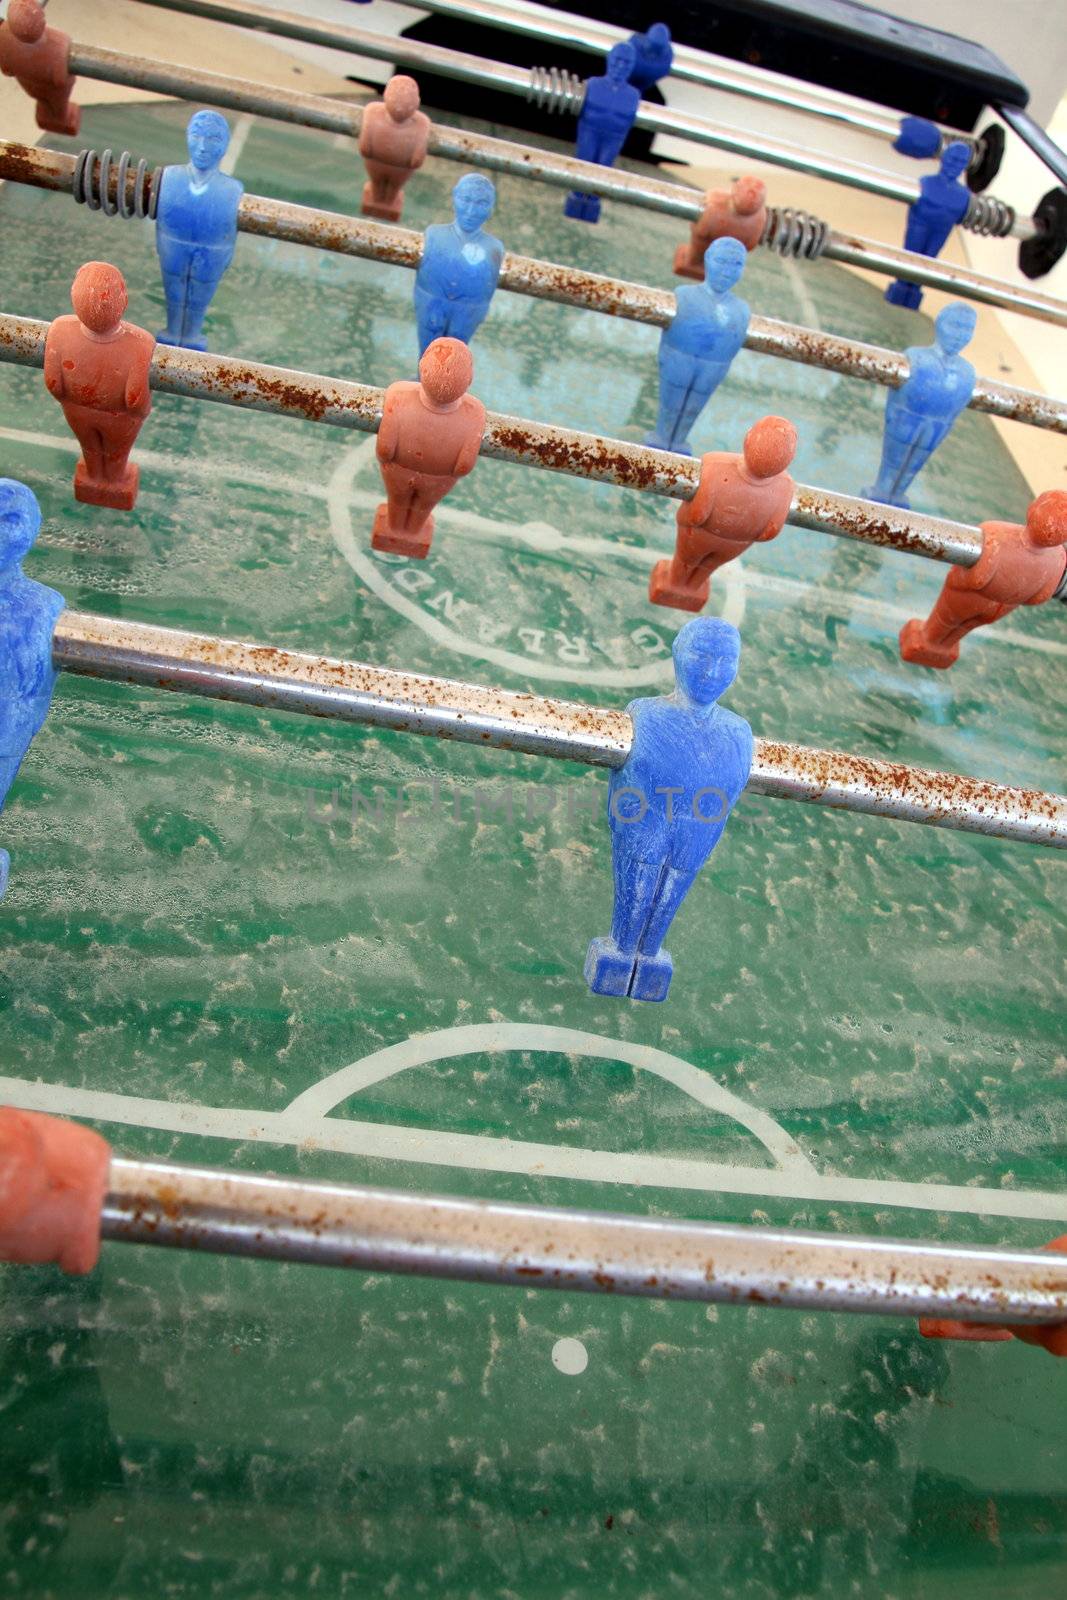 Table football game also known as foosball